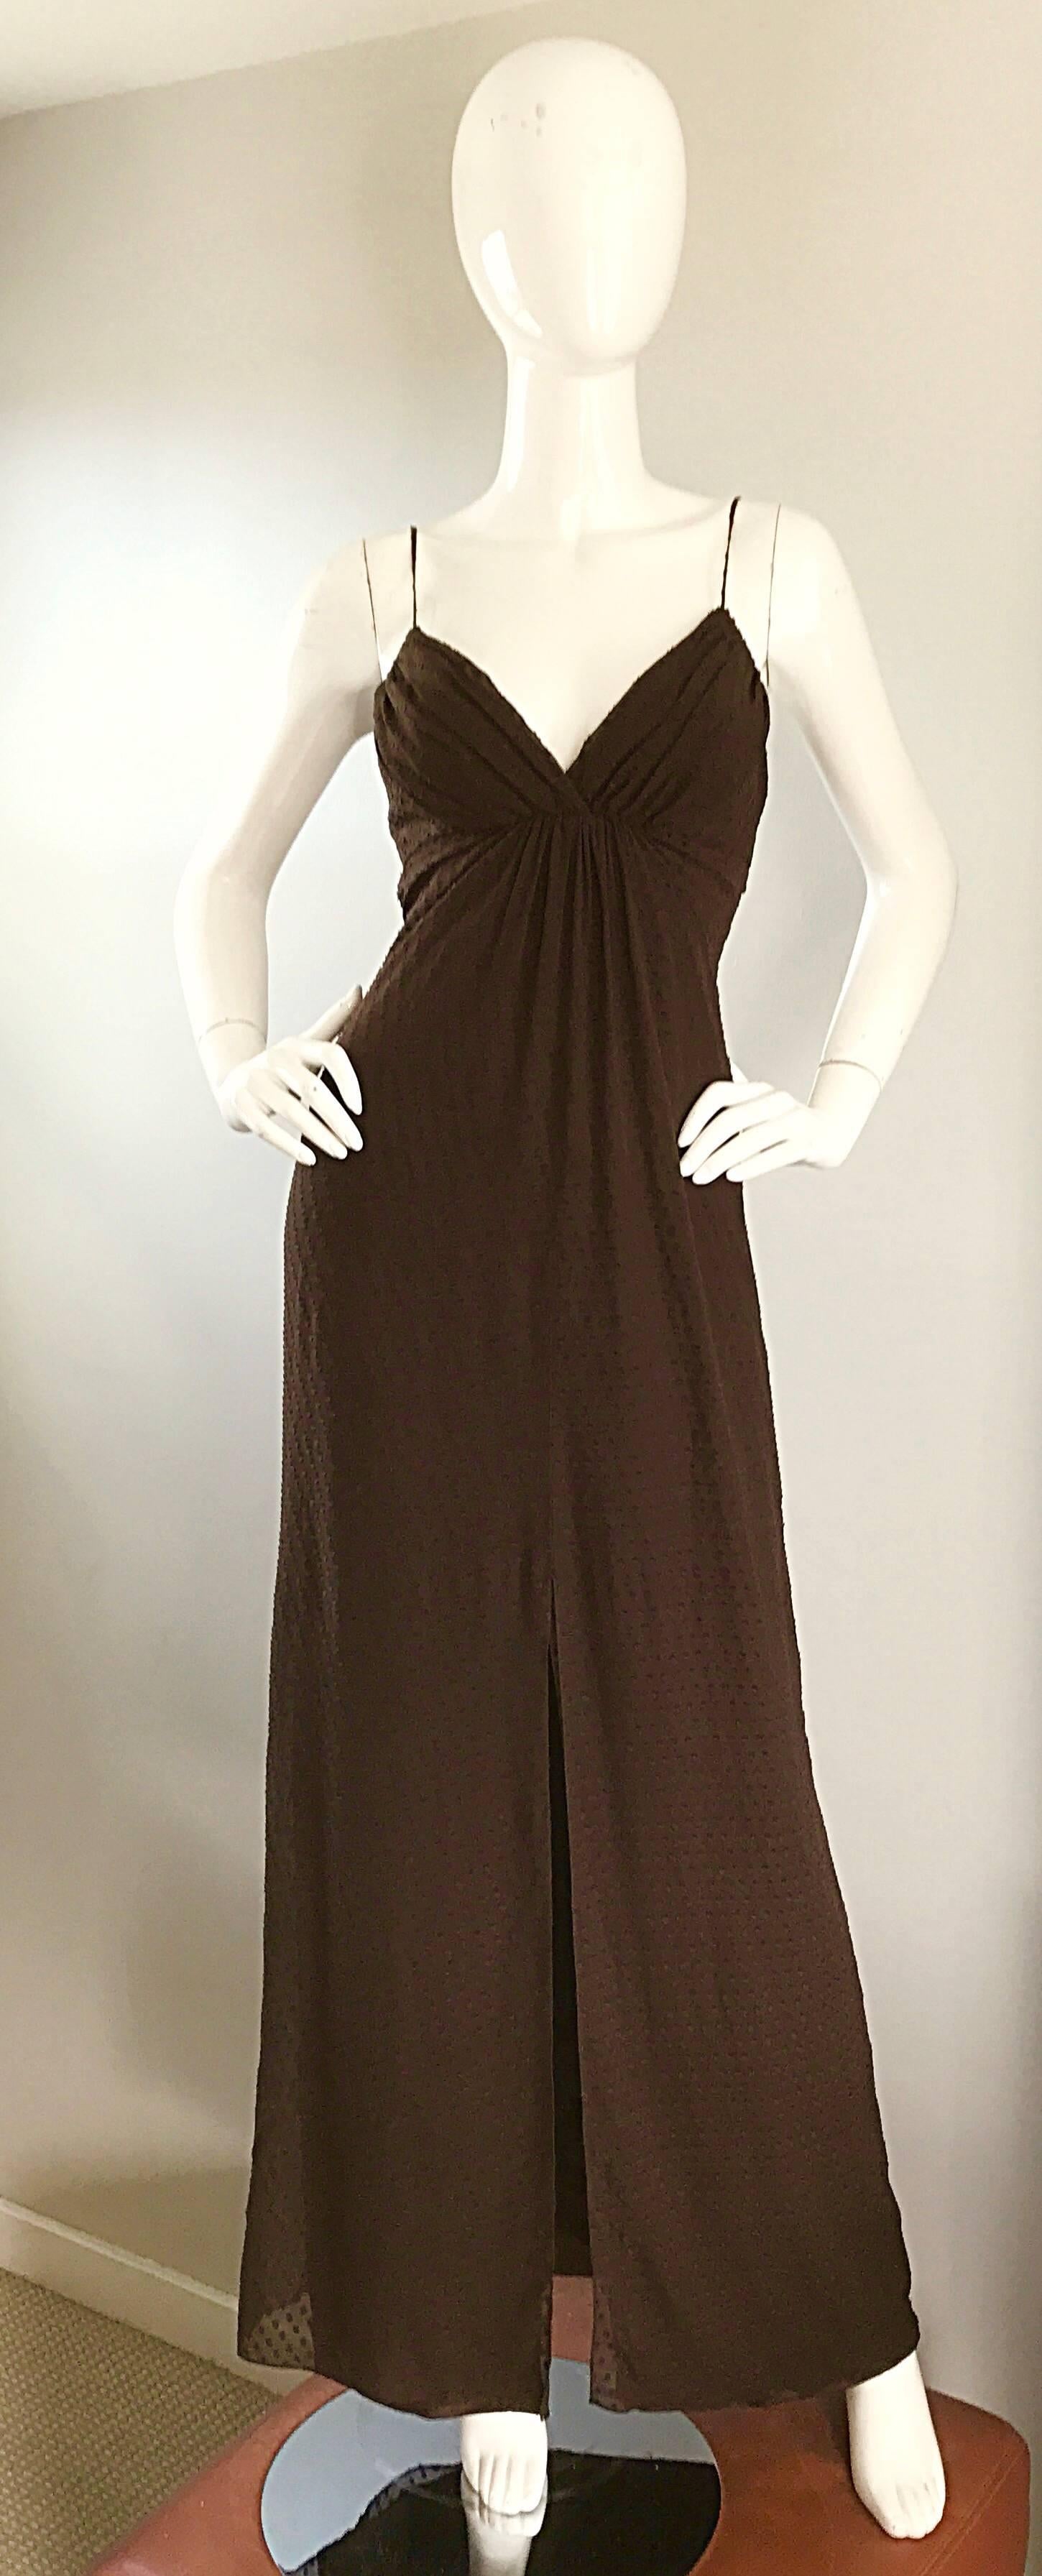 Beautiful vintage 90s CAROLINA HERRERA chocolate espresso brown silk chiffon evening gown! Features textured silk chiffon over brown liquid silk. Thin spaghetti straps at each shoulder with a deep v neckline that reveals just the right amount of